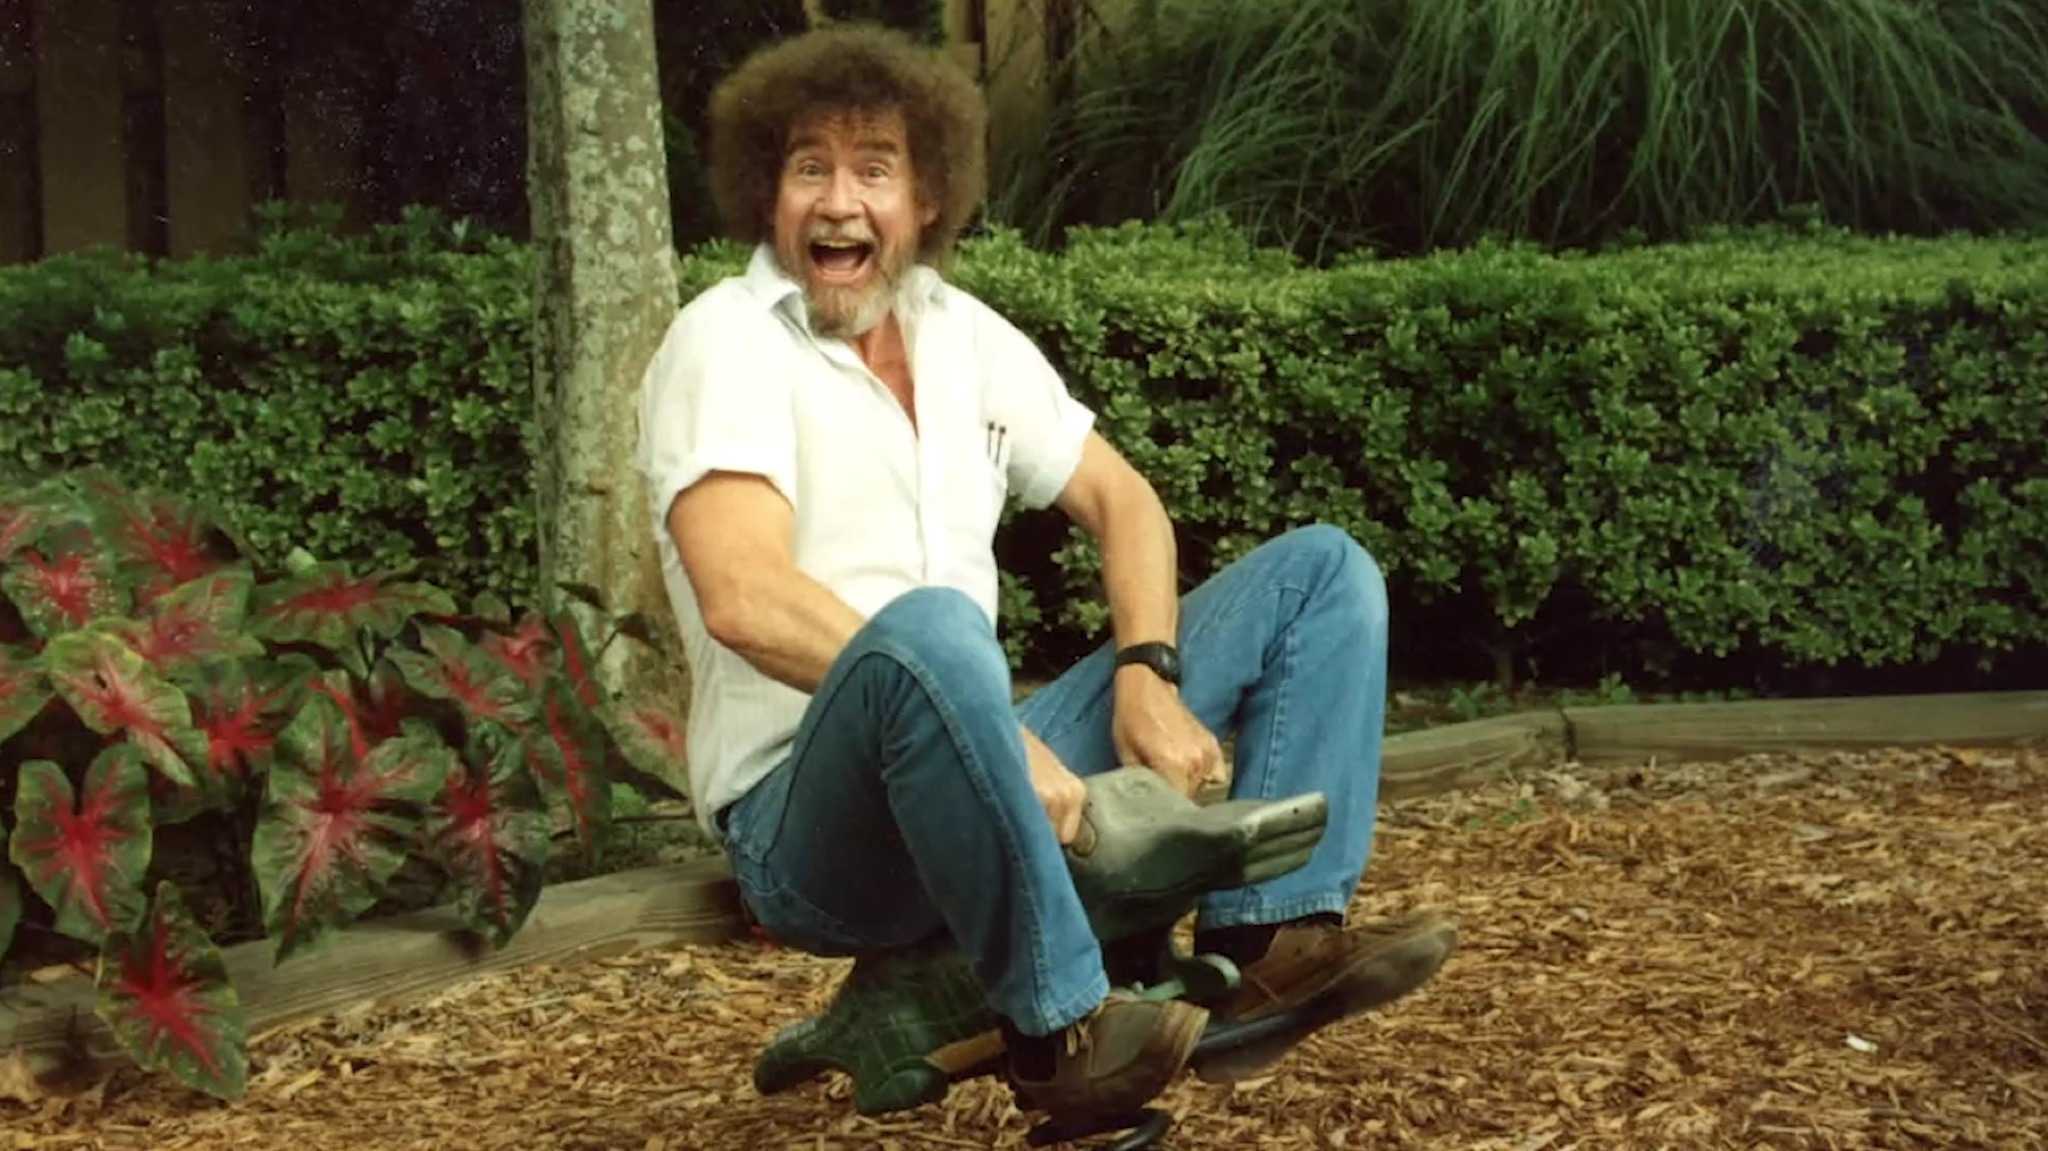 A photograph of Bob Ross playing on a childrens playground